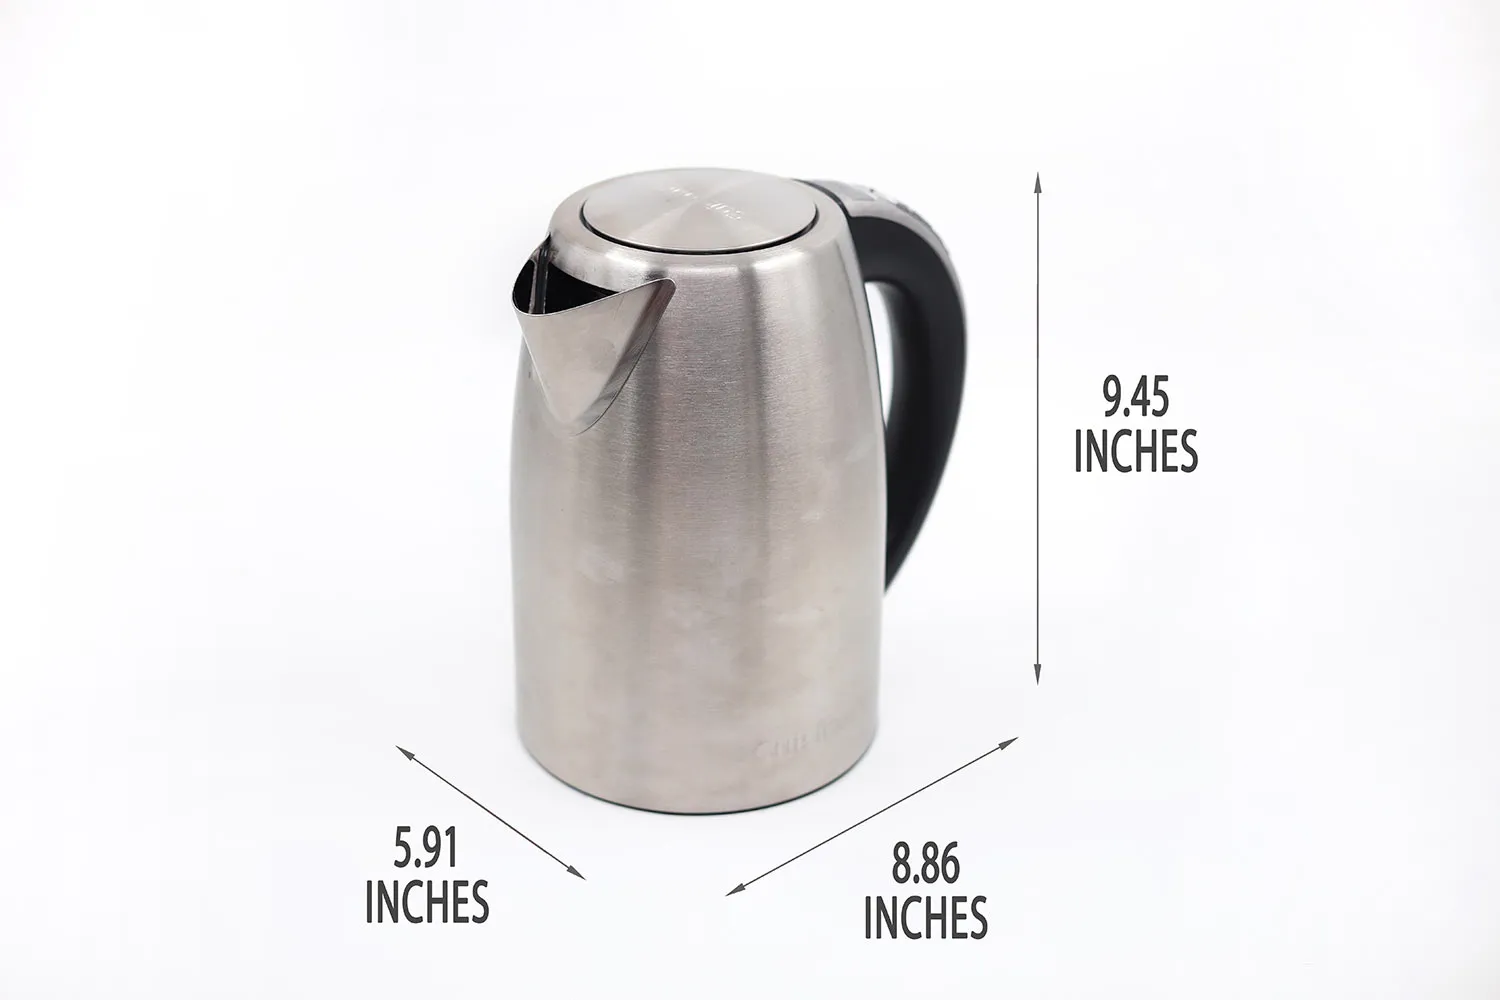 https://cdn.healthykitchen101.com/reviews/images/kettles/cuisinart-stainless-steel-electric-kettle-dimensions-clnfo7ugf0005kw881j1z39ll.jpg